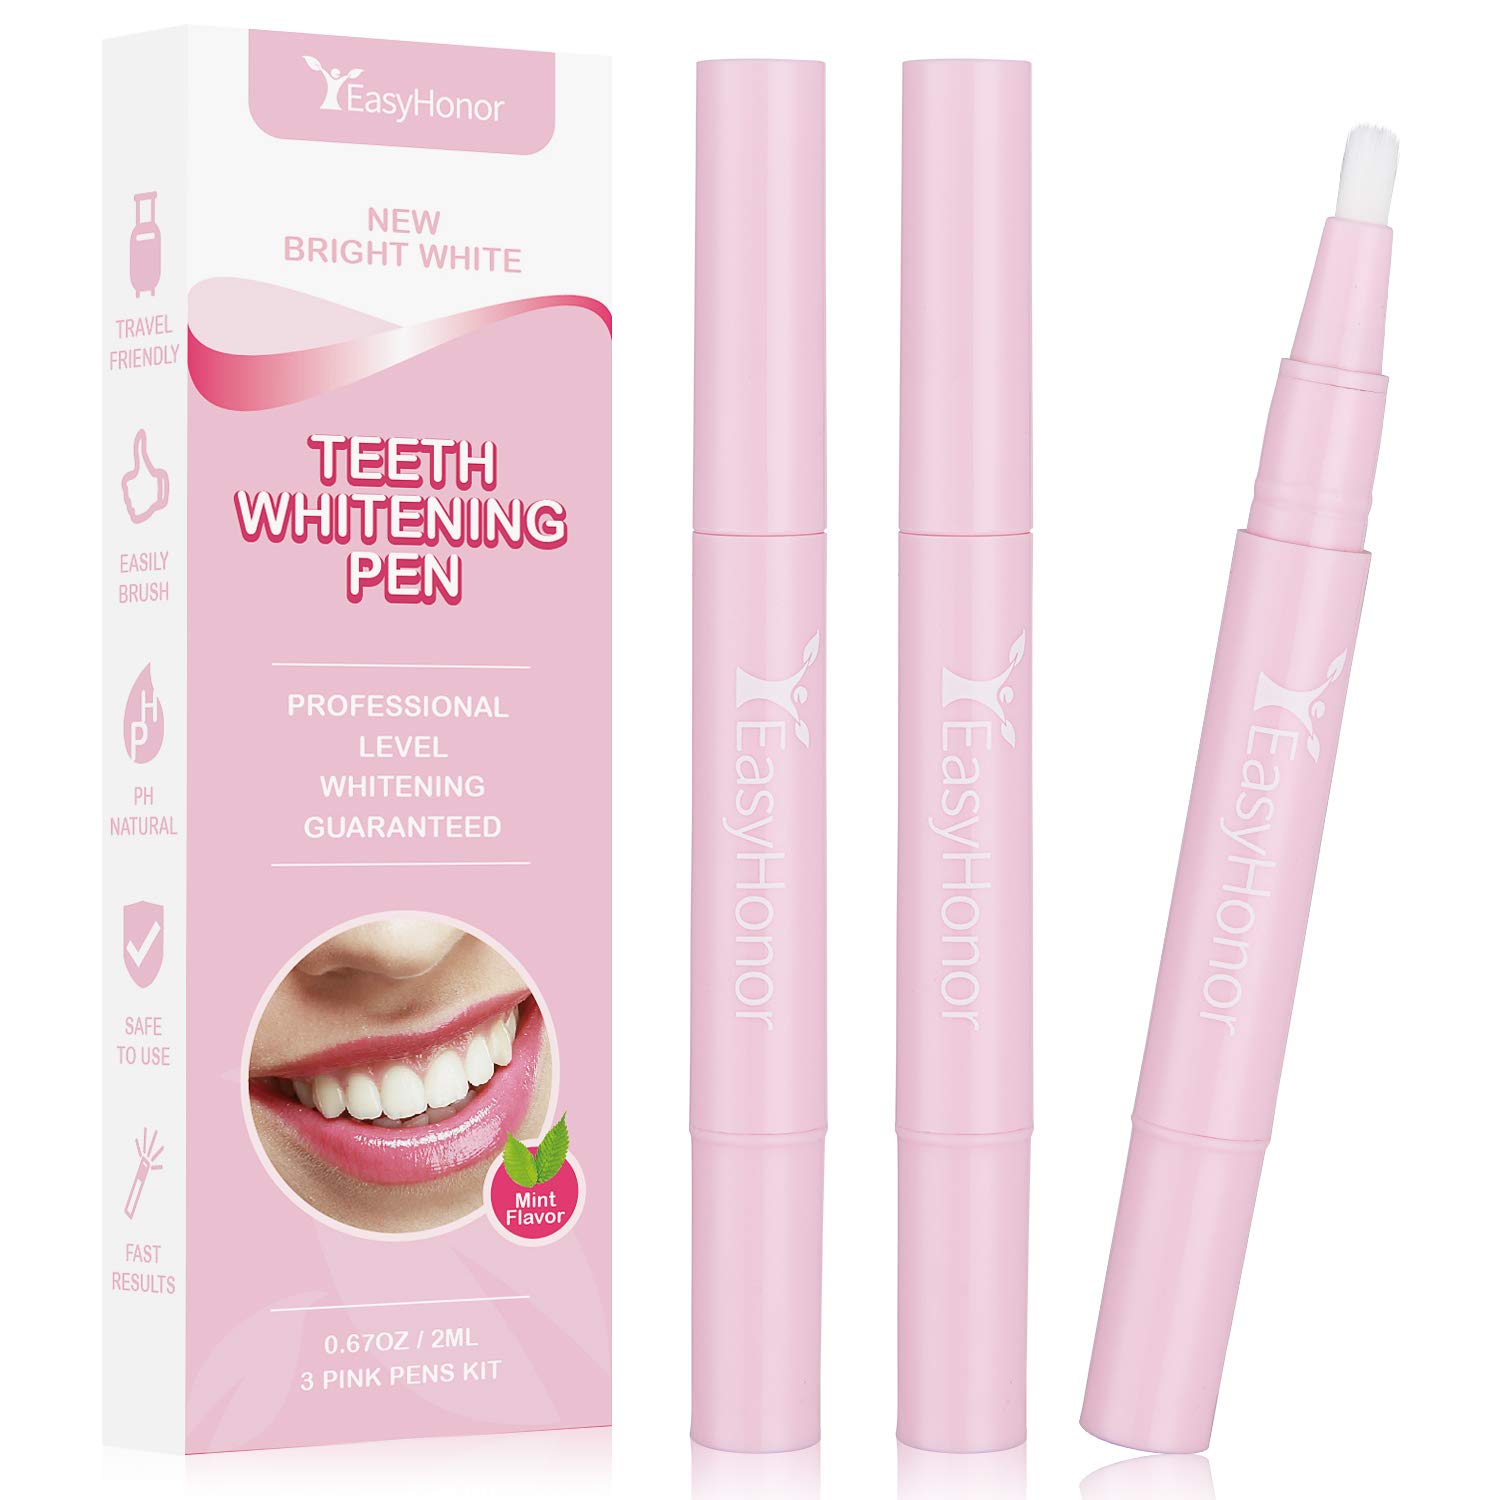 EasyHonor Teeth Whitening Pen Gel Dental - 3 PCS Pink Kit,35% Carbamide Peroxide Gel, Safe and Effective for Teeth Whitening, Travel-Friendly, Easy to Use, Natural Mint Flavor